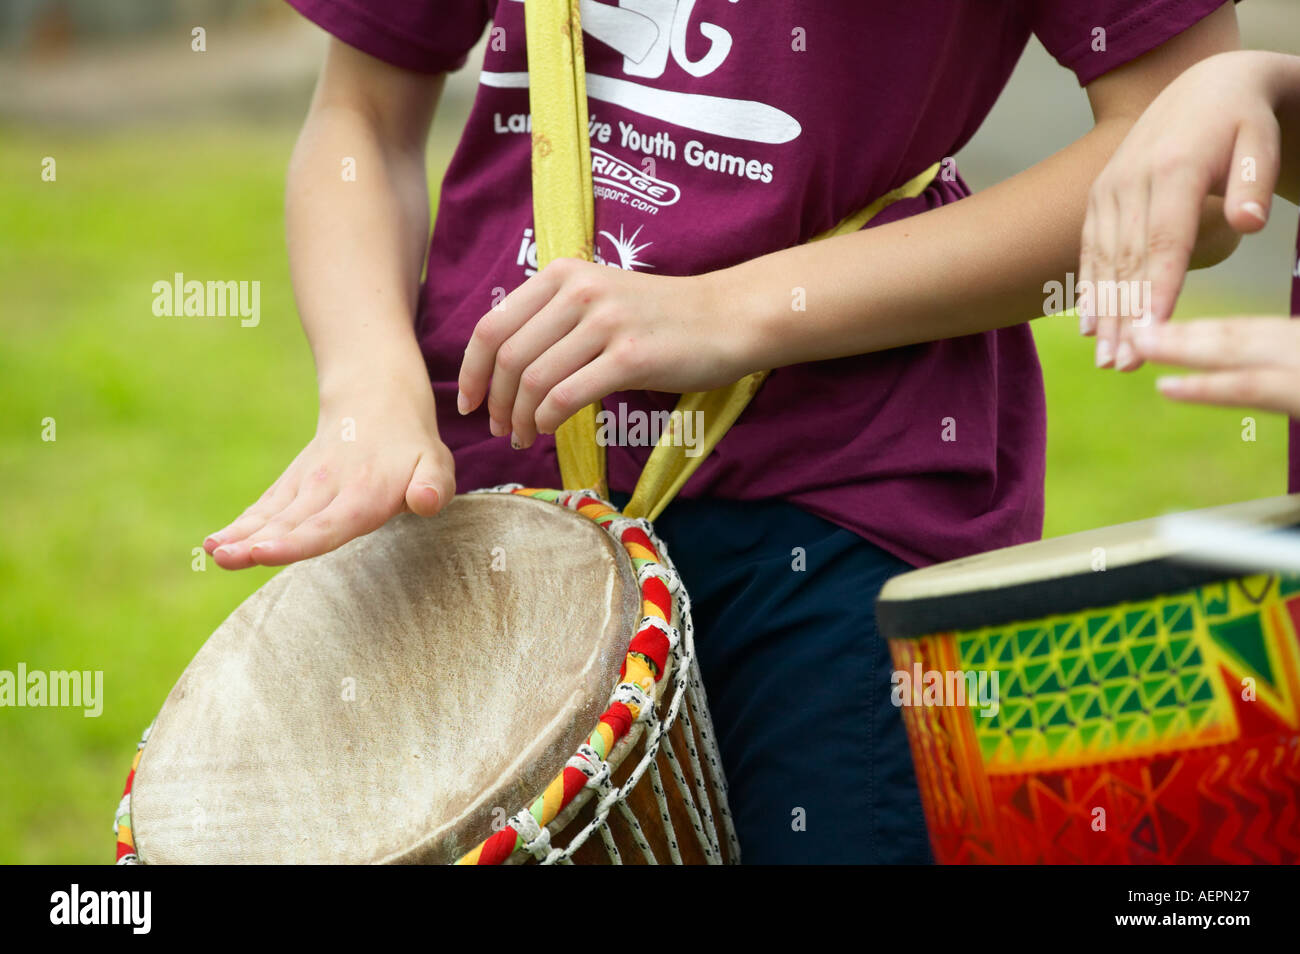 young girl playing a drum at a sporting event Stock Photo